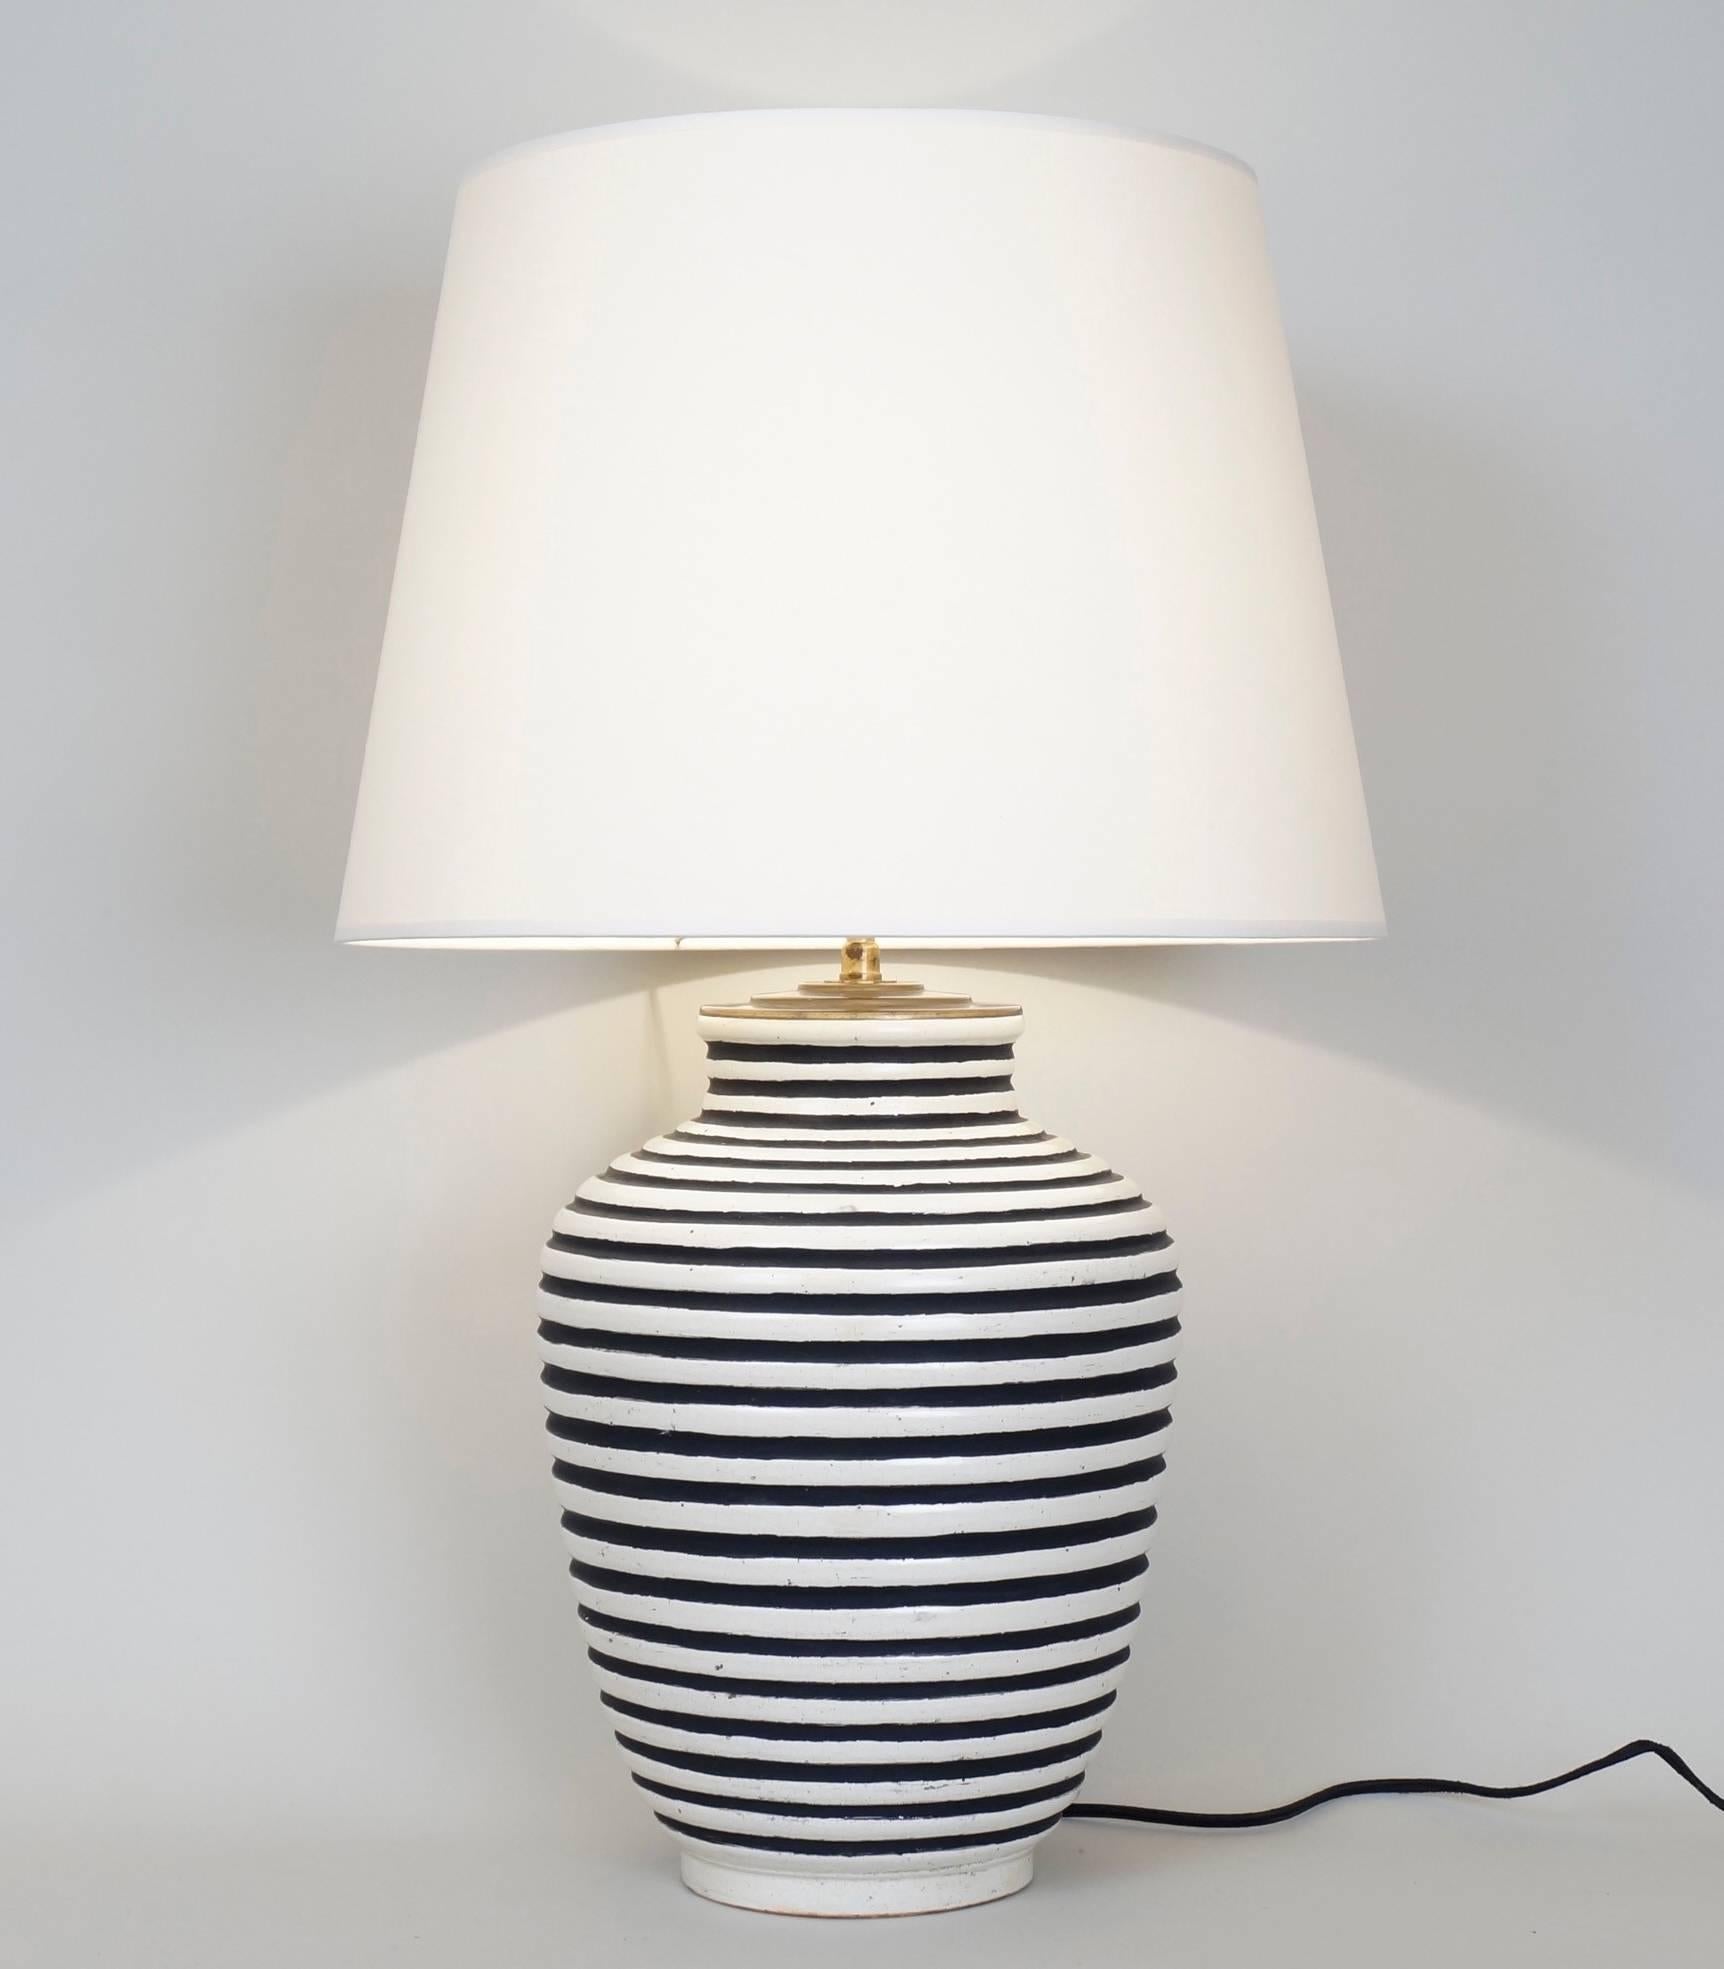 Primavera table lamp, signed Primavera and stamped made in France on the back, custom-made upholstered lampshade.
US standard plug on demand.

Measures: Ceramic height 30cm - 11,8in.
Height with shade 56 cm - 22in.
Lampshade width 34 cm -